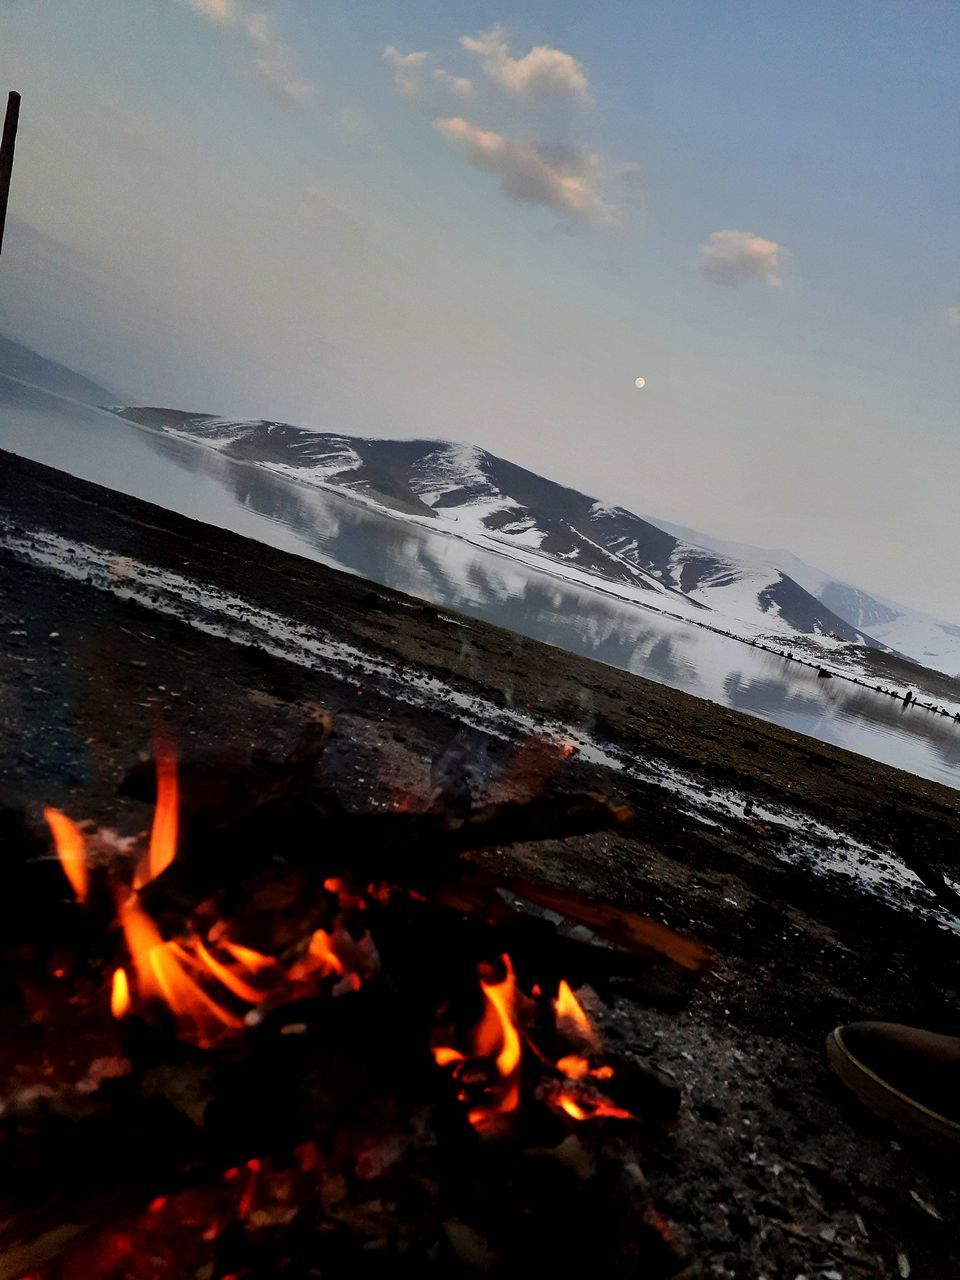 nature, heat, burning, flame, fire, sky, land, beach, no people, beauty in nature, water, motion, bonfire, sea, wood, environment, outdoors, winter, glowing, orange color, scenics - nature, log, campfire, camping, snow, cloud, mountain, day, long exposure